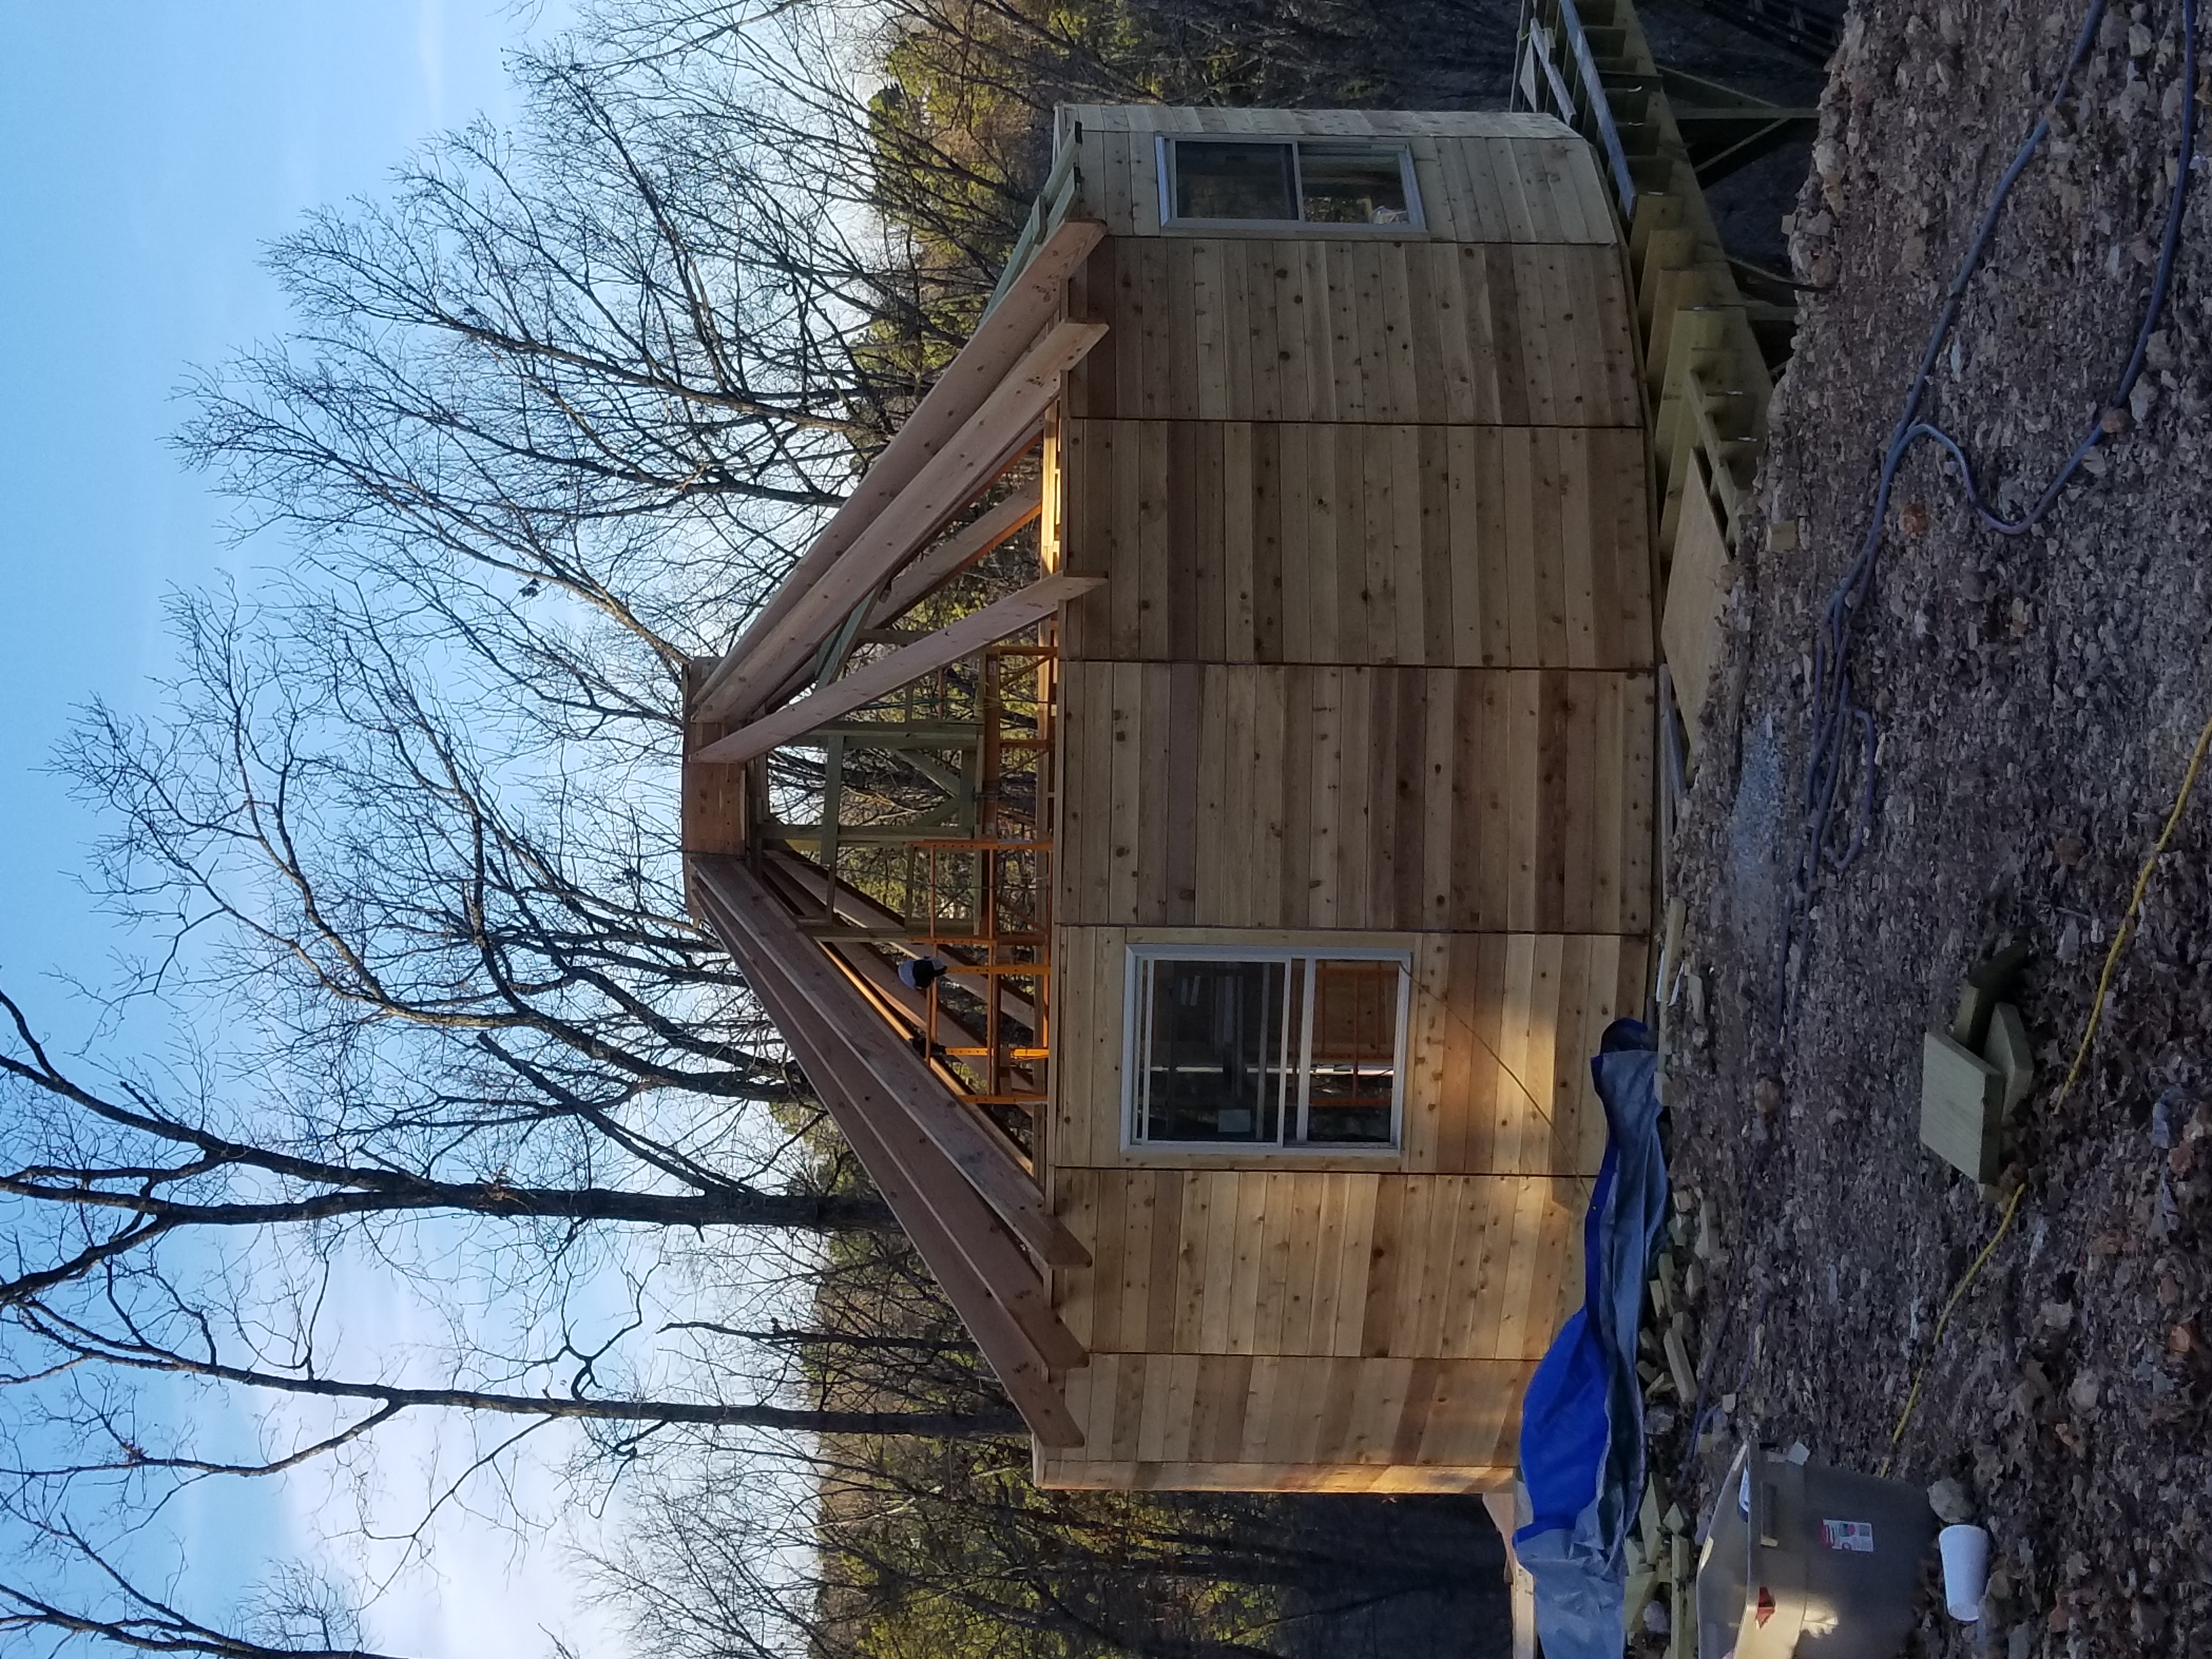 Construction Continues – Rafters and Eves